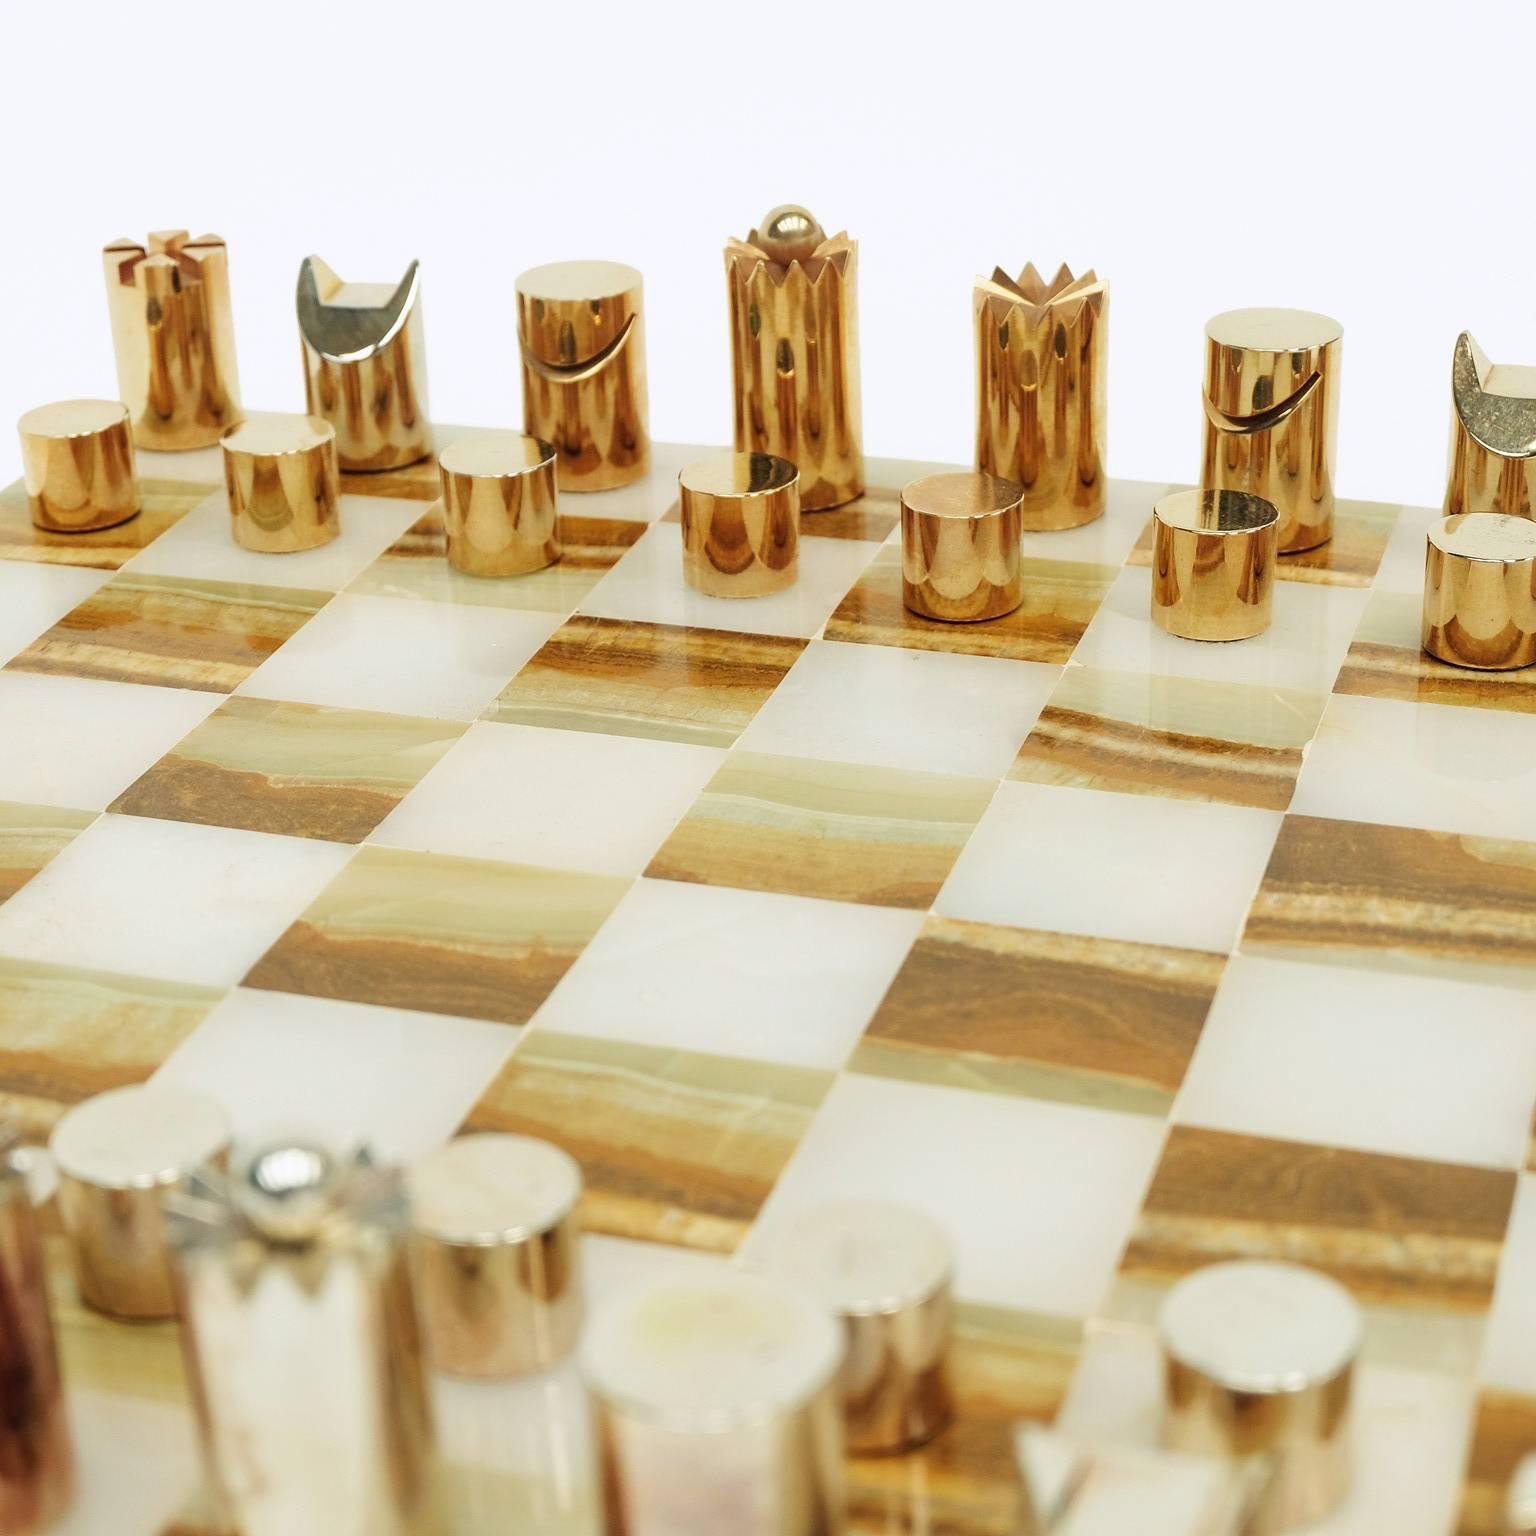 1970s chess set designed and manufactured in Italy.
 
Solid polished gold and nickel-plated steel pieces with an Onyx board.

This is a substantial set that weighs 10 kilos.